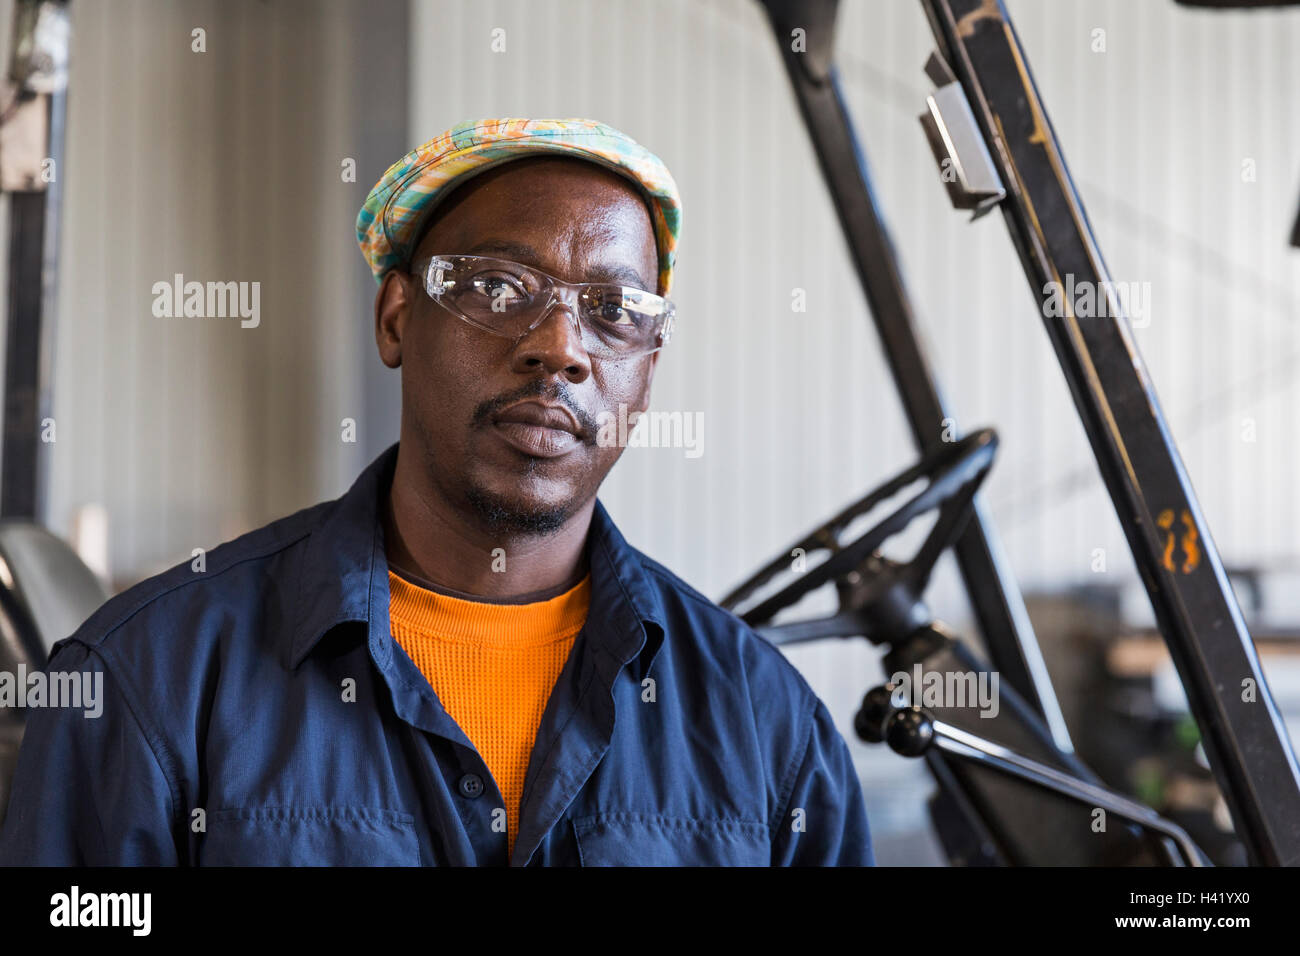 Serious Black worker posing near forklift in factory Stock Photo